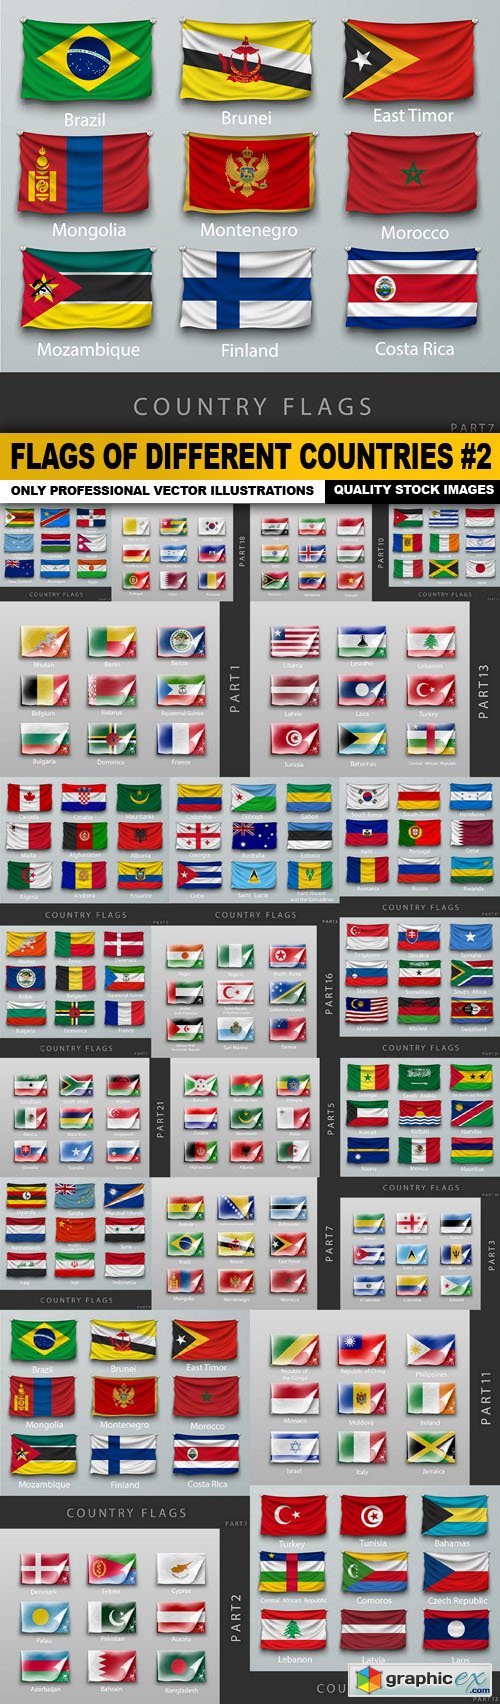 Flags Of Different Countries #2